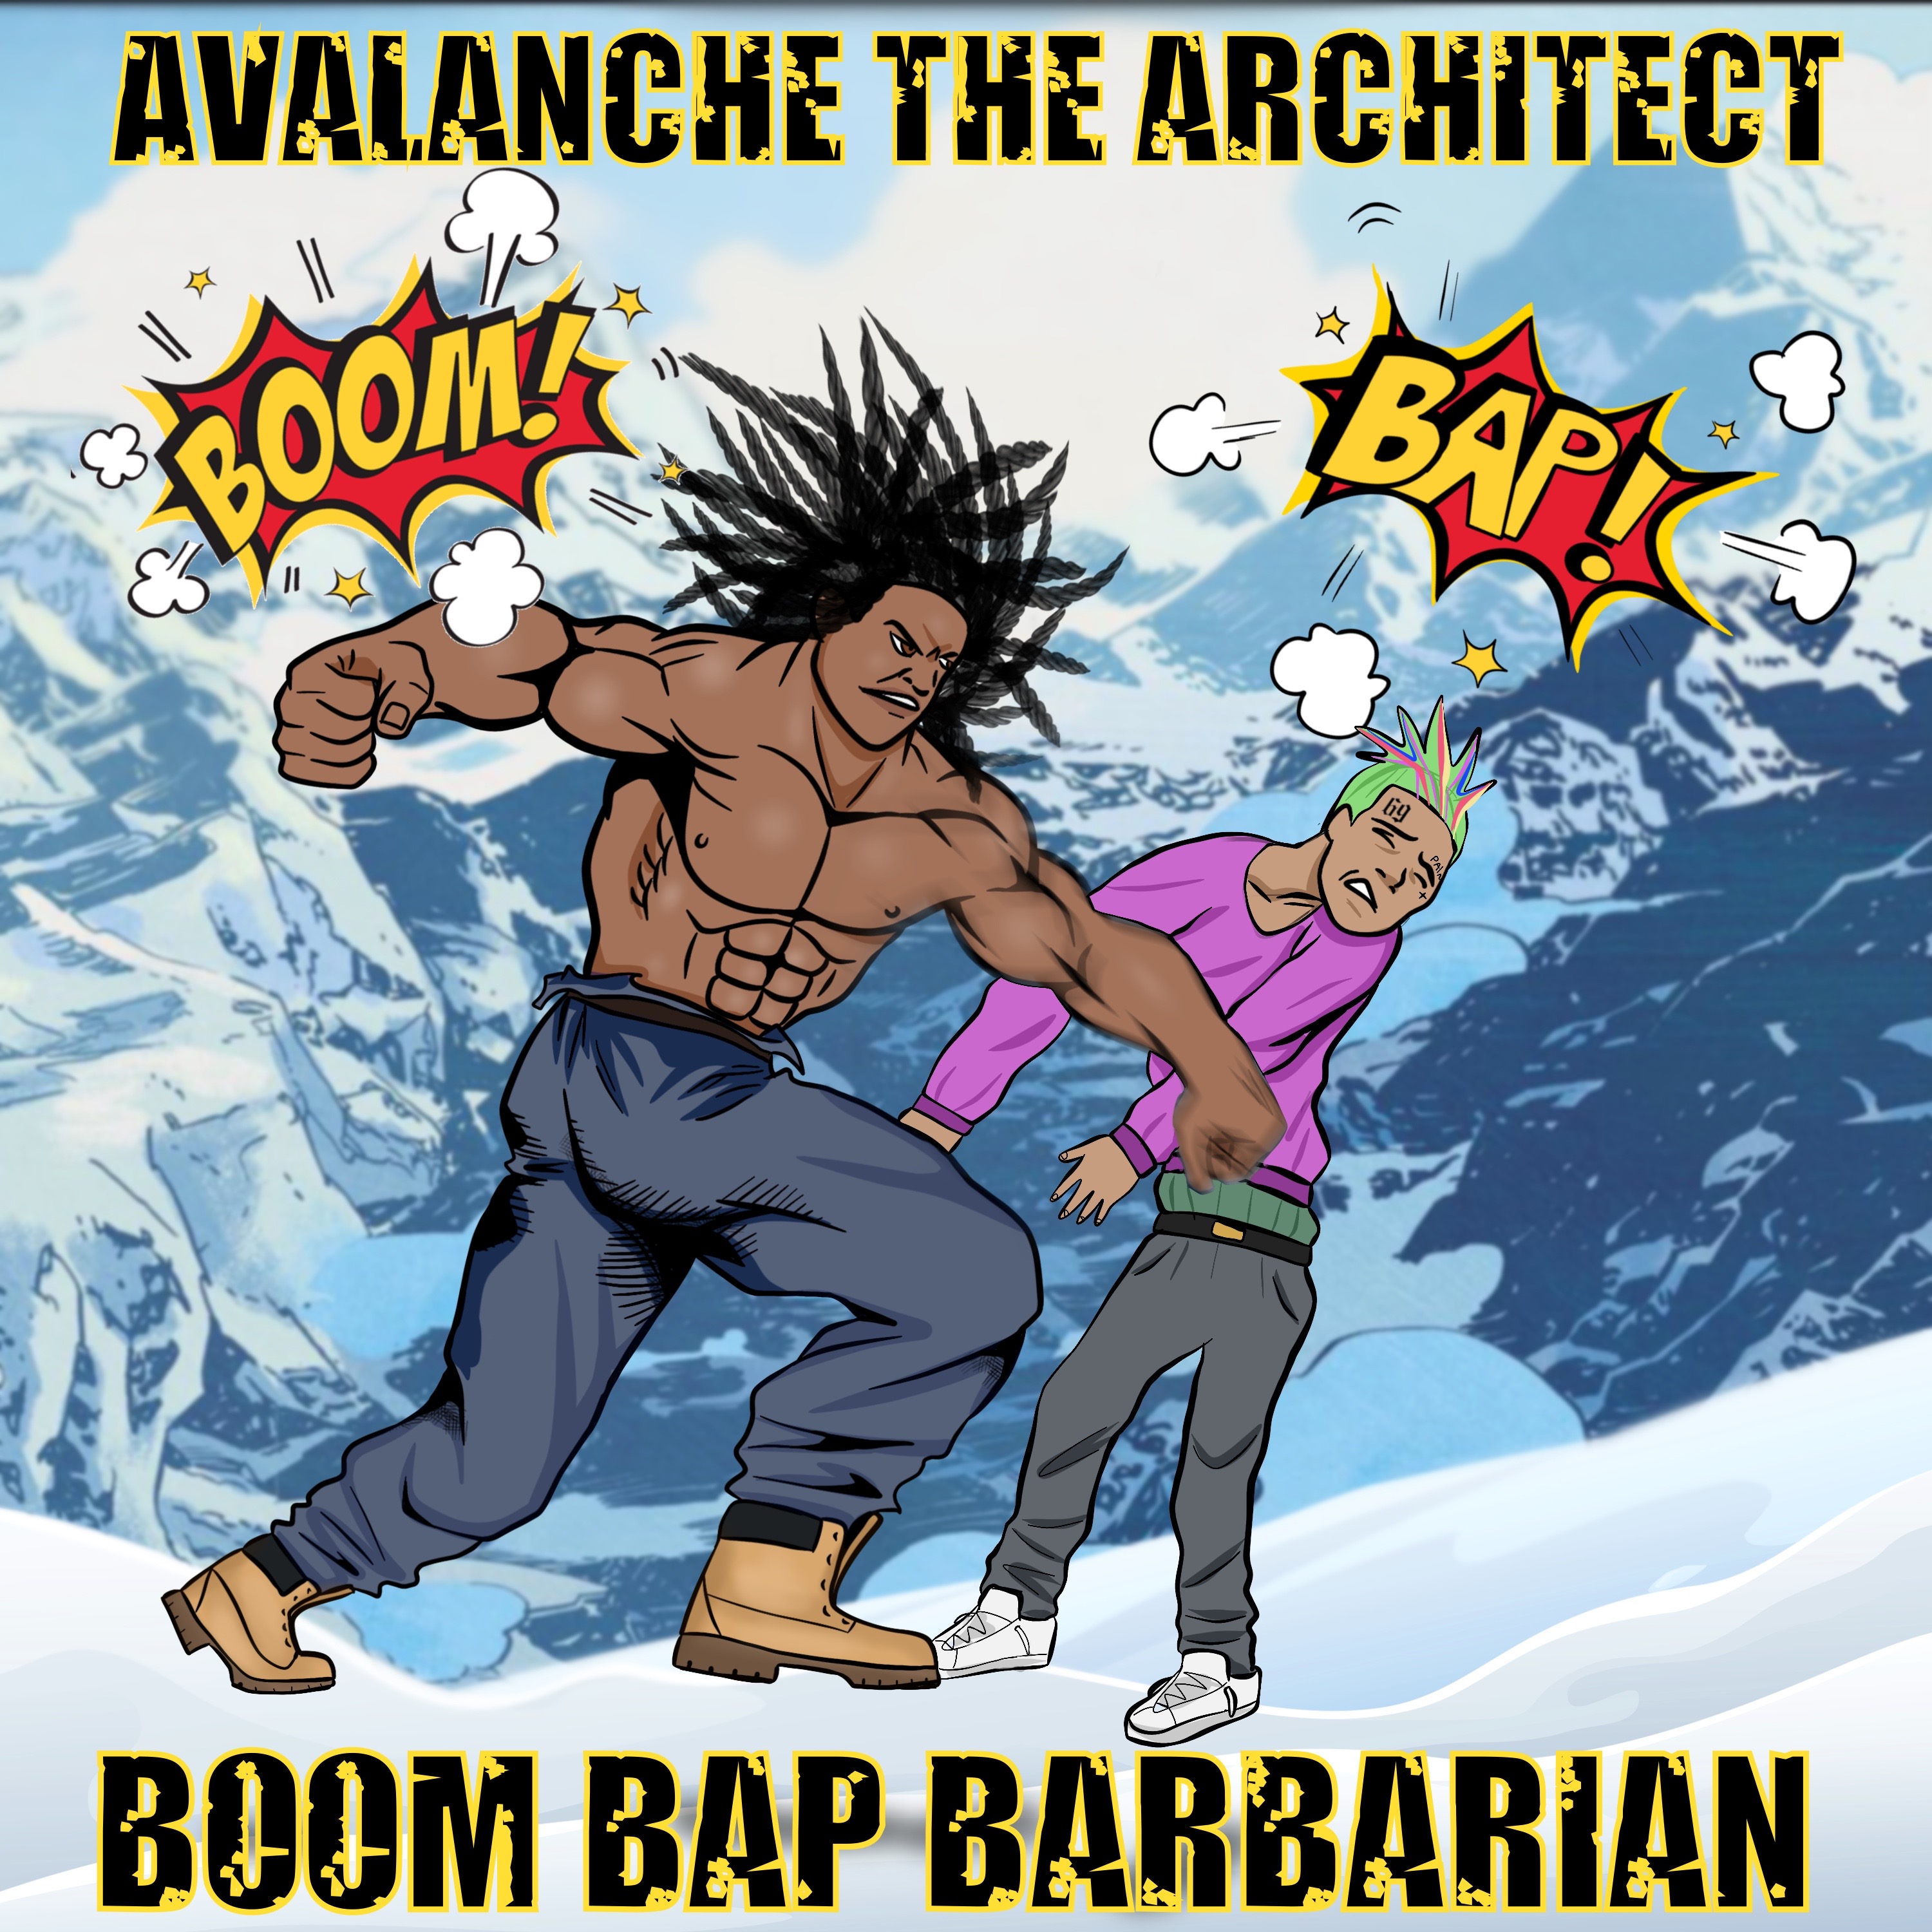 Avalanche The Architect releases one the most lyrical Boom Bap albums of the year with "Let There Be War"